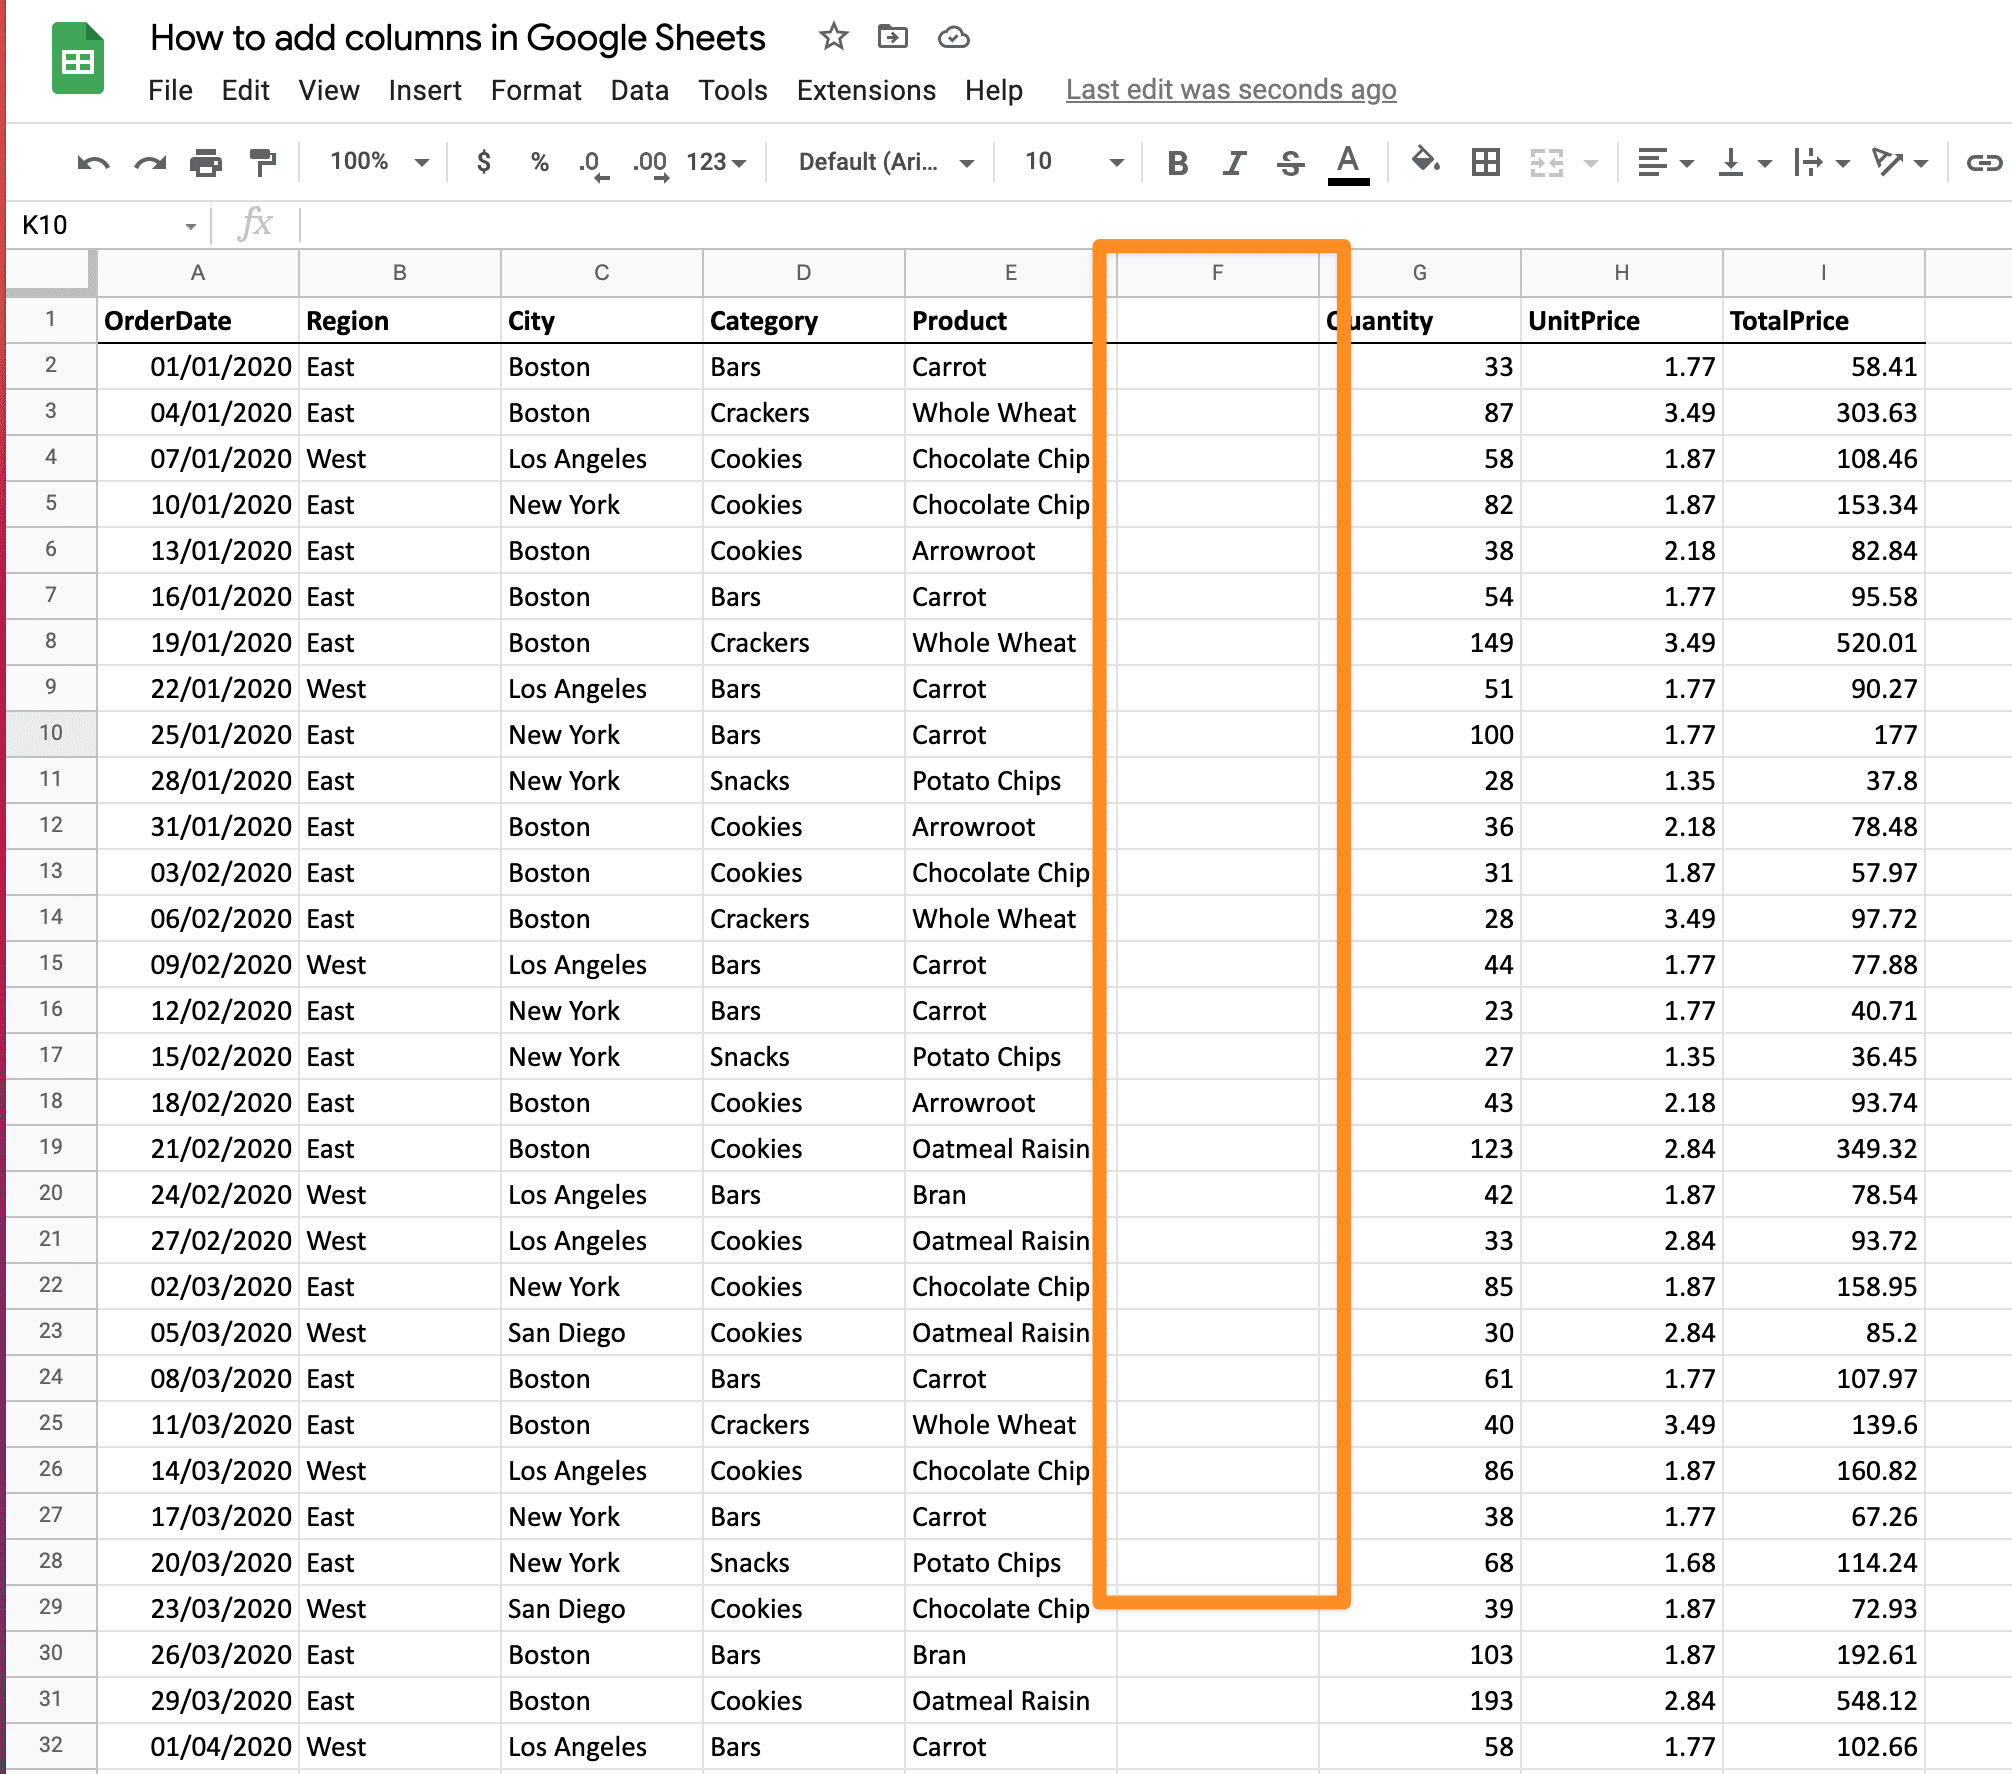 How to add columns in Google Sheets